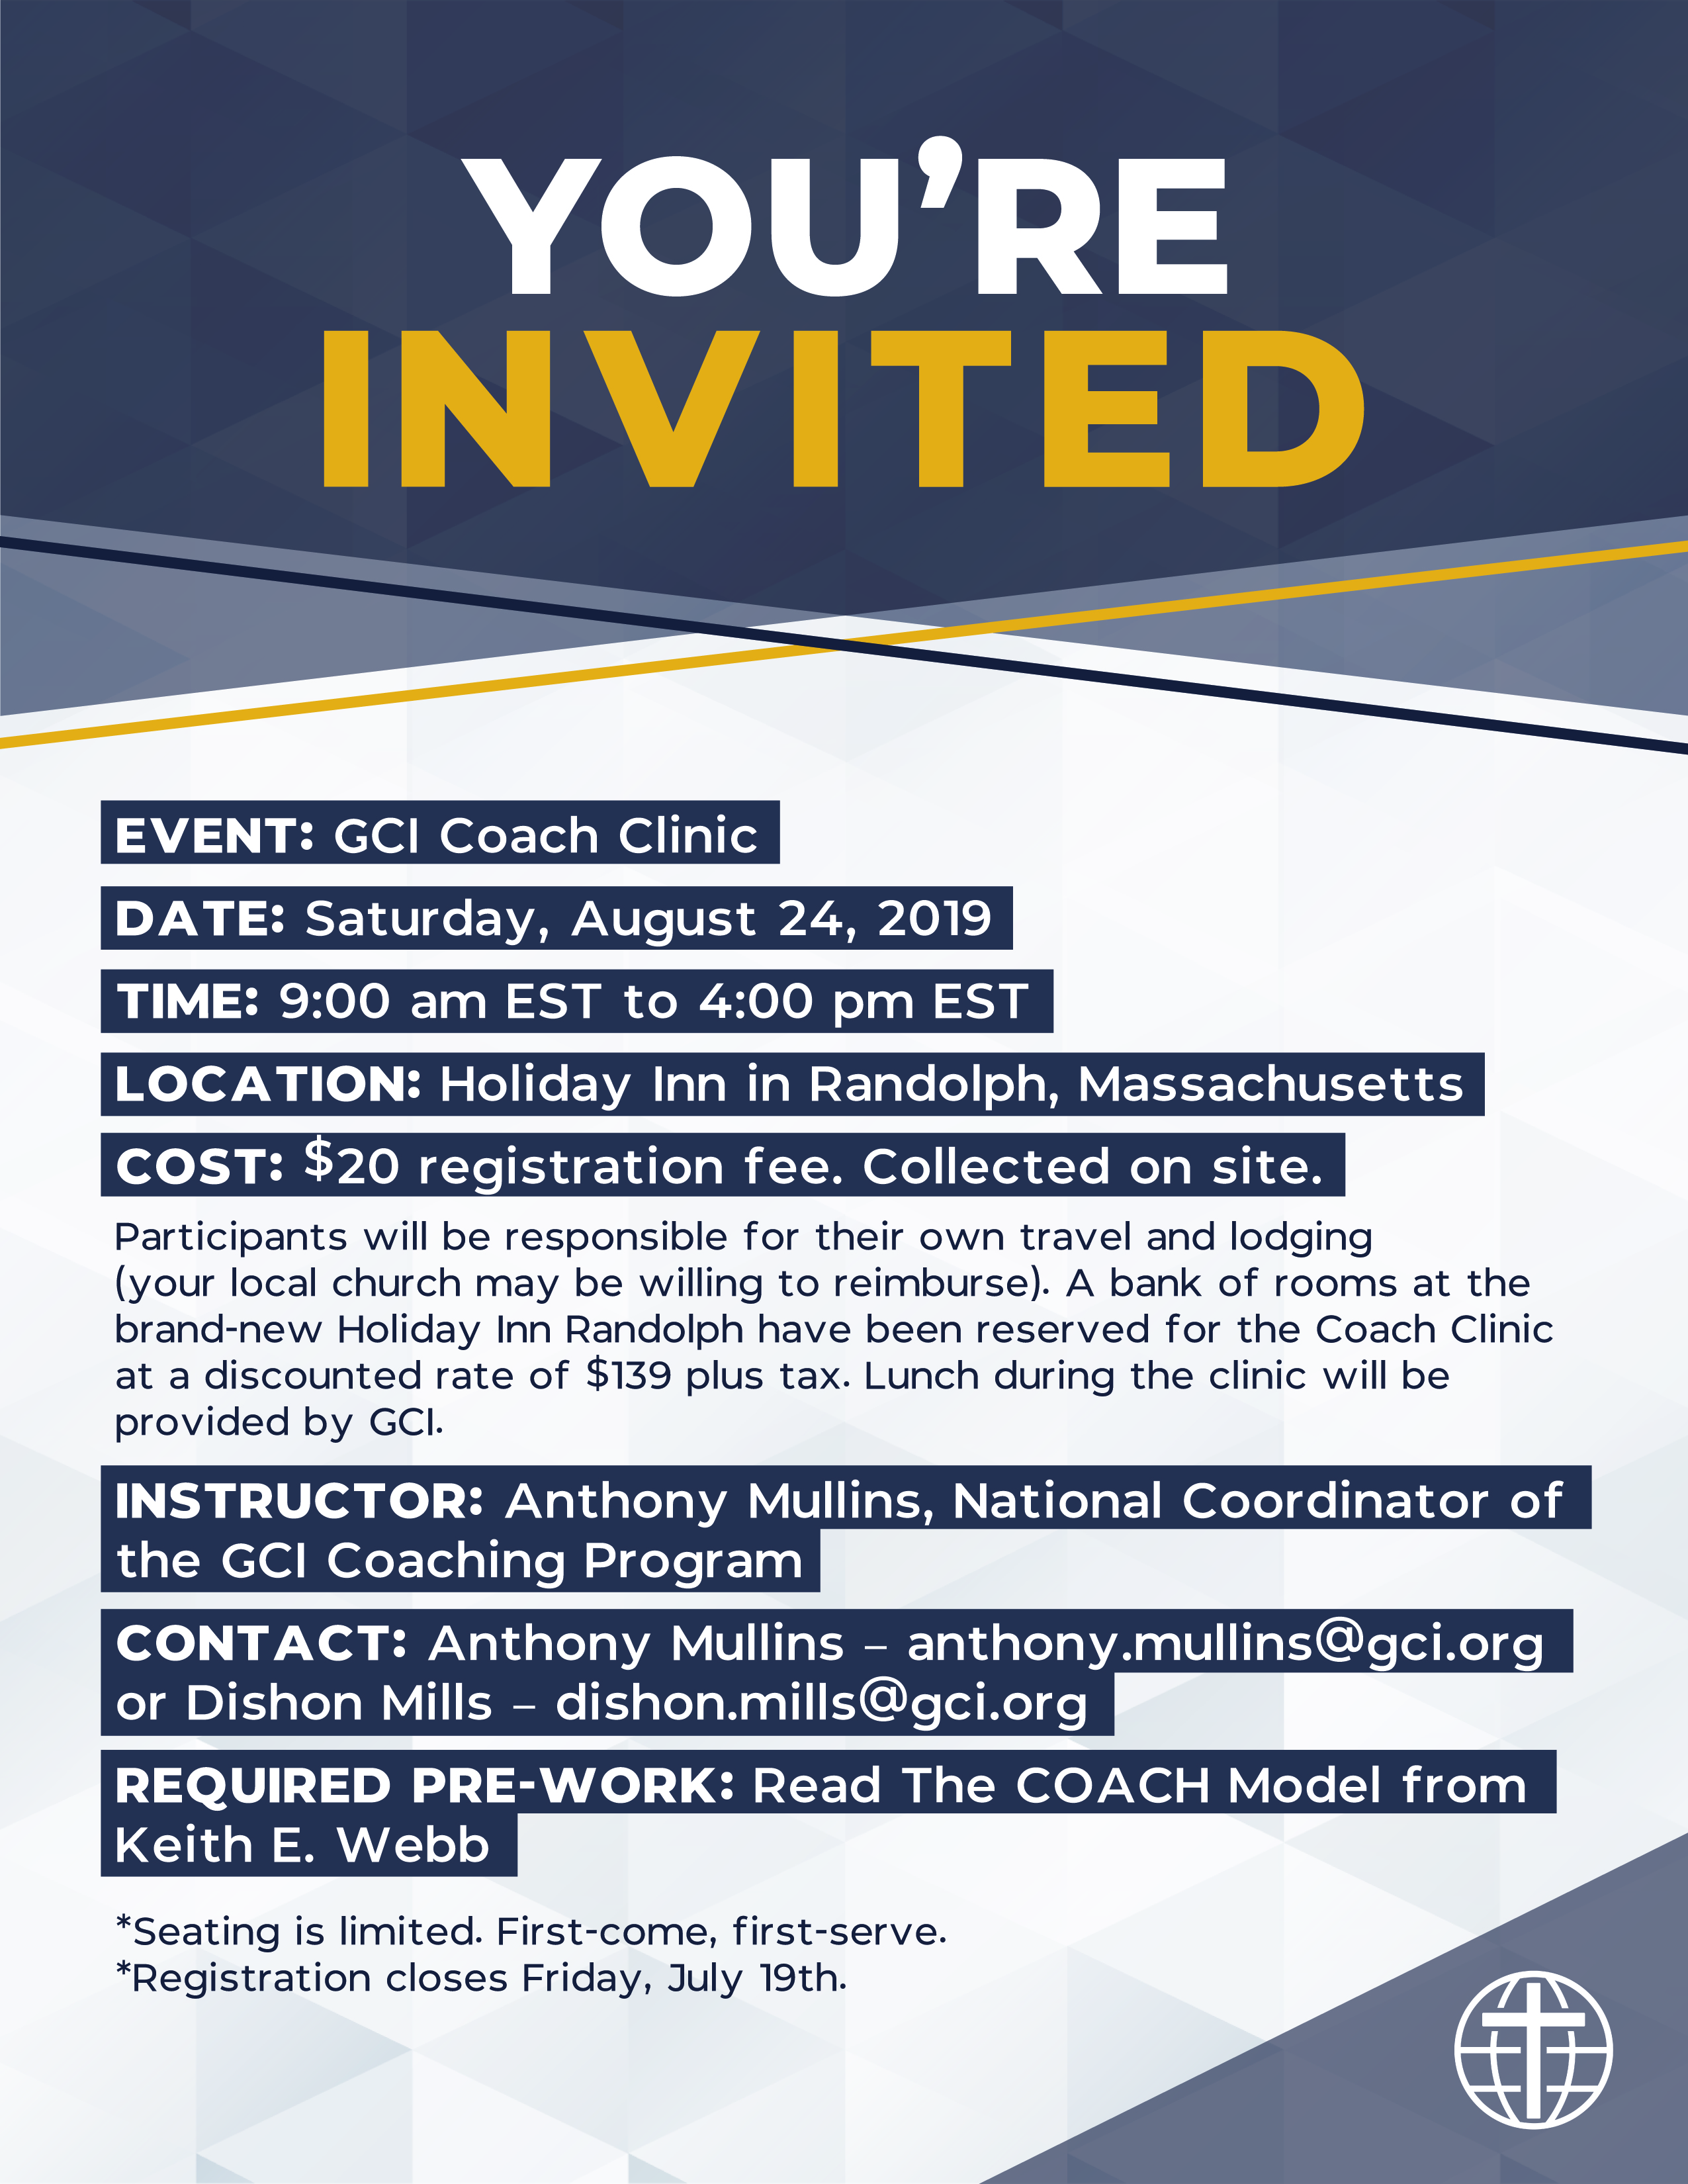 YOU'RE INVITED EVENT: GCI Coach Clinic DATE: Saturday, August 24, 2019 TIME: 9:00 am EST to 4:00 pm EST LOCATION: Holiday Inn in Randolph, Massachusetts COST: $20 registration fee. Collected on site. Participants will be responsible for their own travel and lodging (your local church may be willing to reimburse). A bank of rooms at the brand-new Holiday Inn Randolph have been reserved for the Coach Clinic at a discounted rate of $139 plus tax. Lunch during the clinic will be provided by GCI. INSTRUCTOR: Anthony Mullins, National Coordinator of the GCI Coaching Program CONTACT: Anthony Mullins – anthony.mullins@gci.org or Dishon Mills – dishon.mills@gci.org REQUIRED PRE-WORK: Read The COACH Model from Keith E. Webb *Seating is limited. First-come, first-serve. *Registration closes Friday, July 19th.